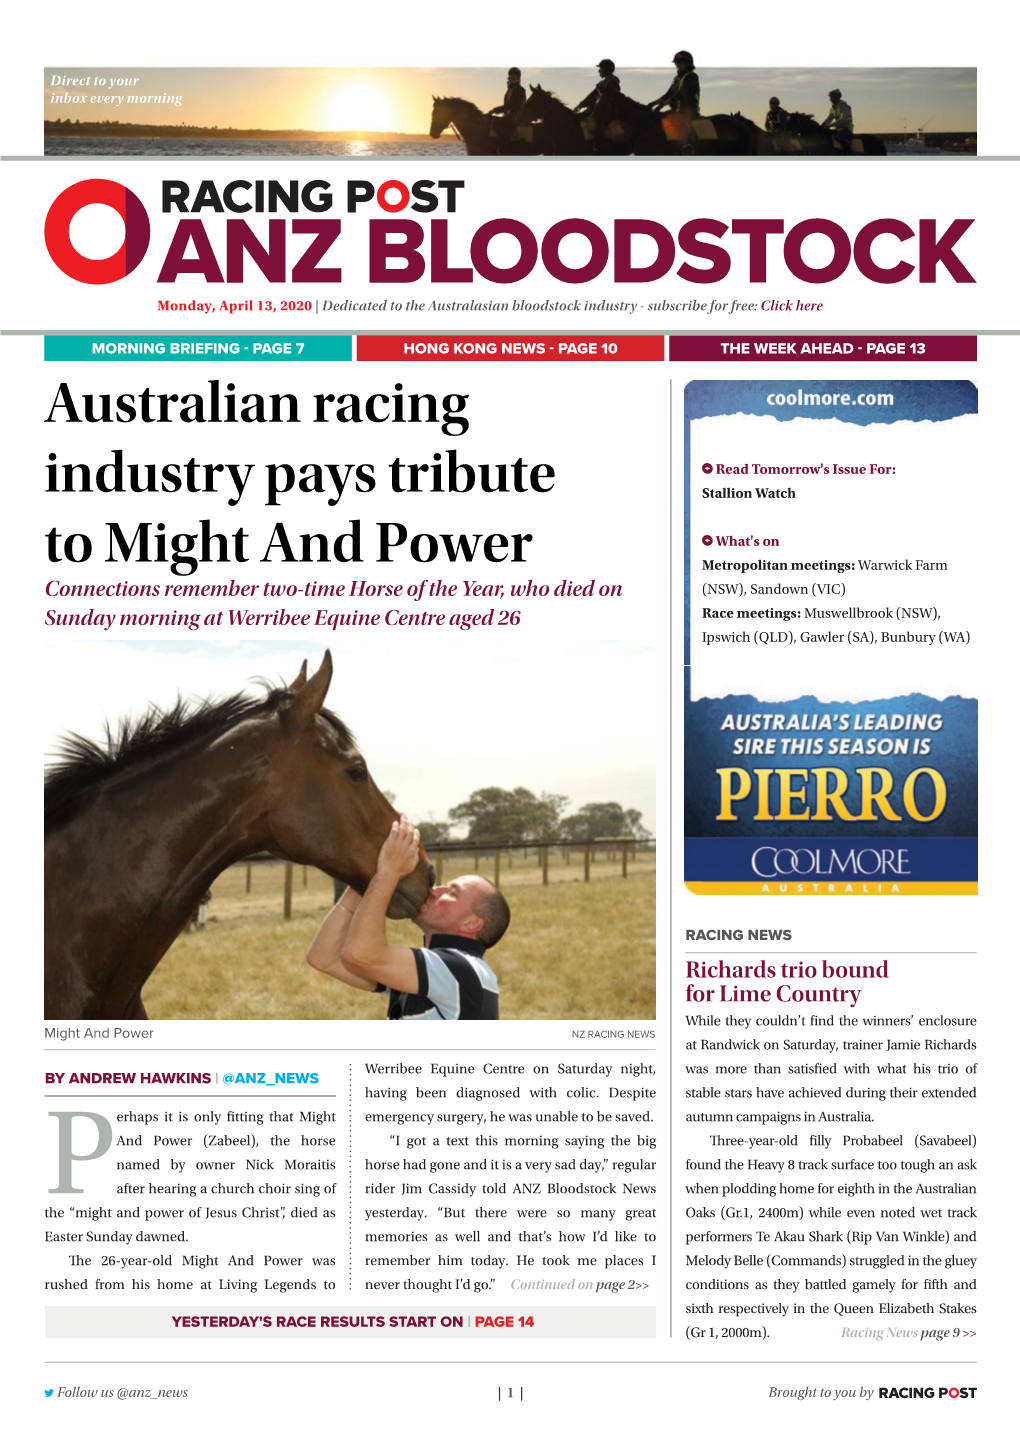 Australian Racing Industry Pays Tribute to Might and Power | 2 | Monday, April 13, 2020